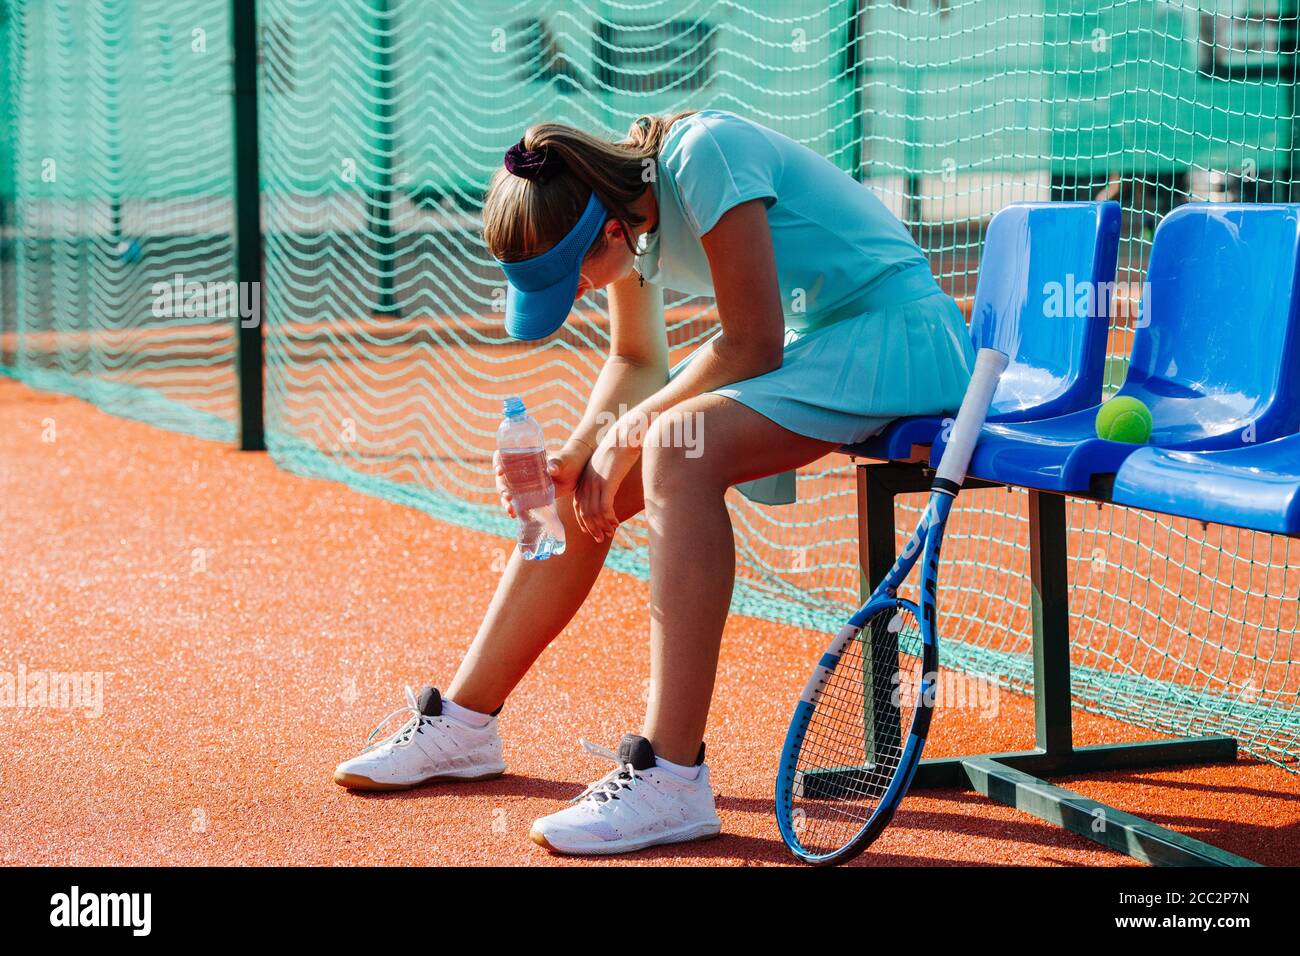 Tired girl sitting on a chair bench next to tennis court to take a short break Stock Photo